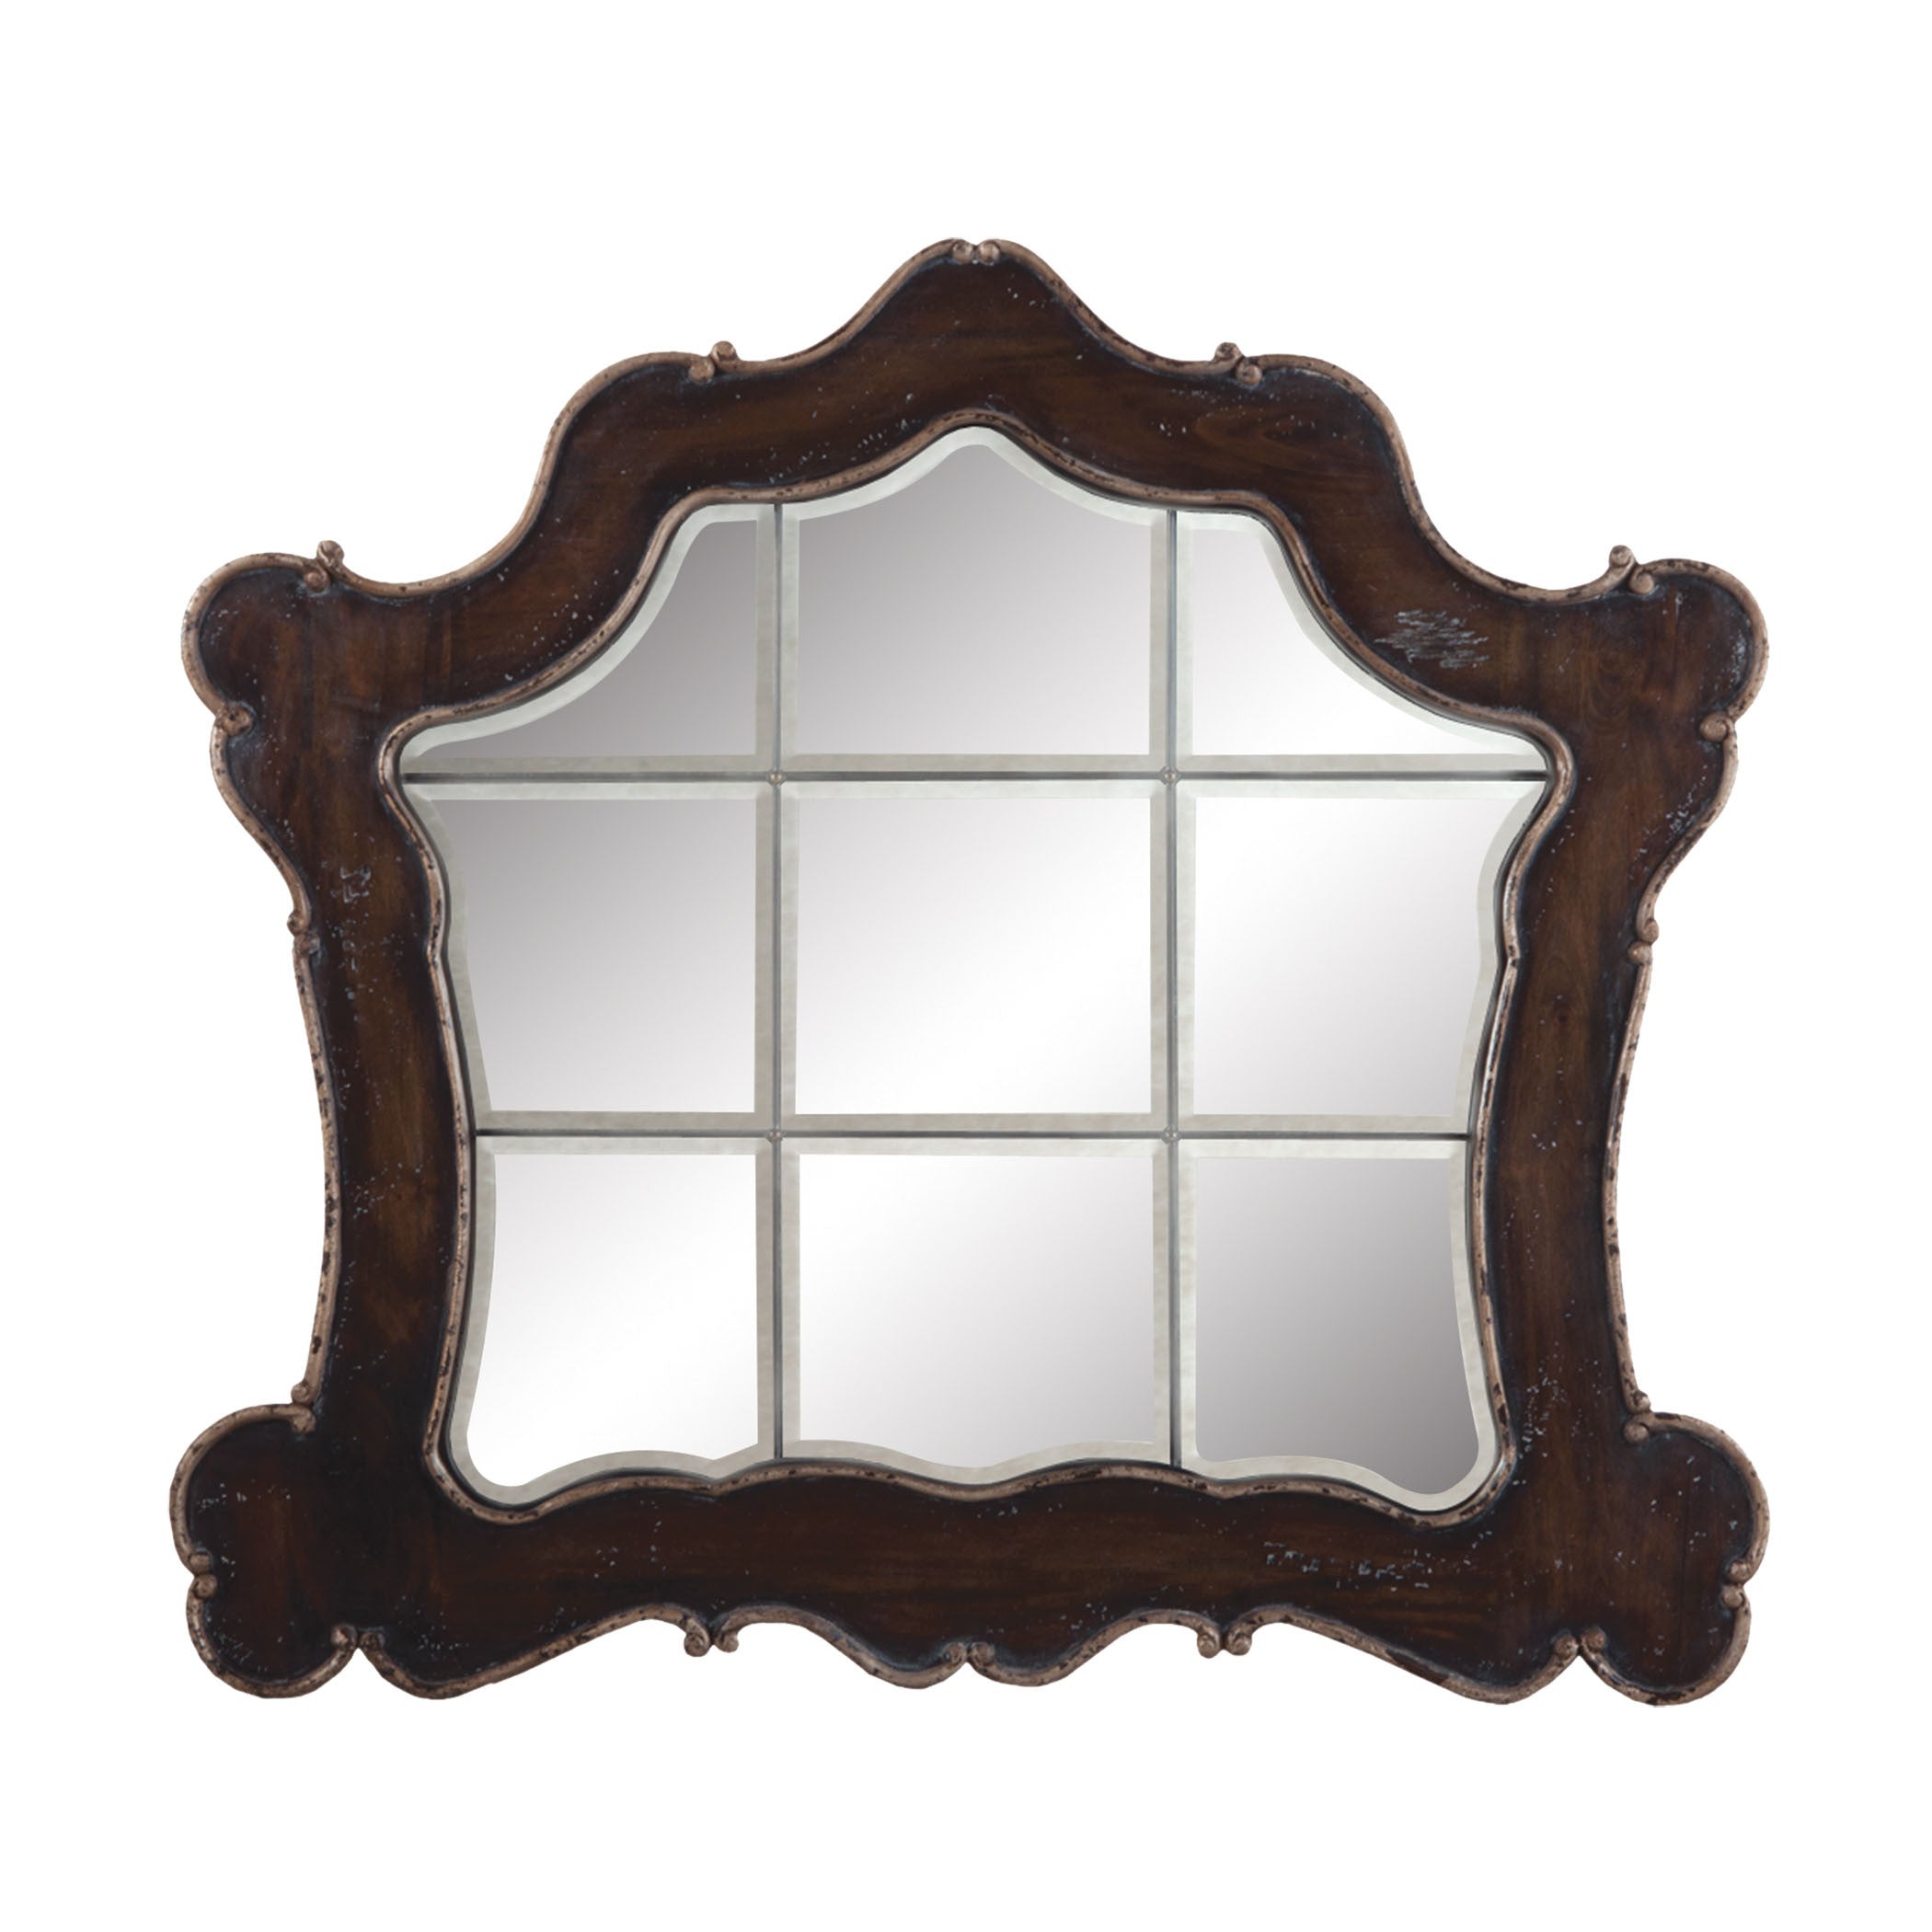 Guildmaster Gui-102509 Heritage Collection Heritage Grey Stain,textured Champagne Finish Mirror